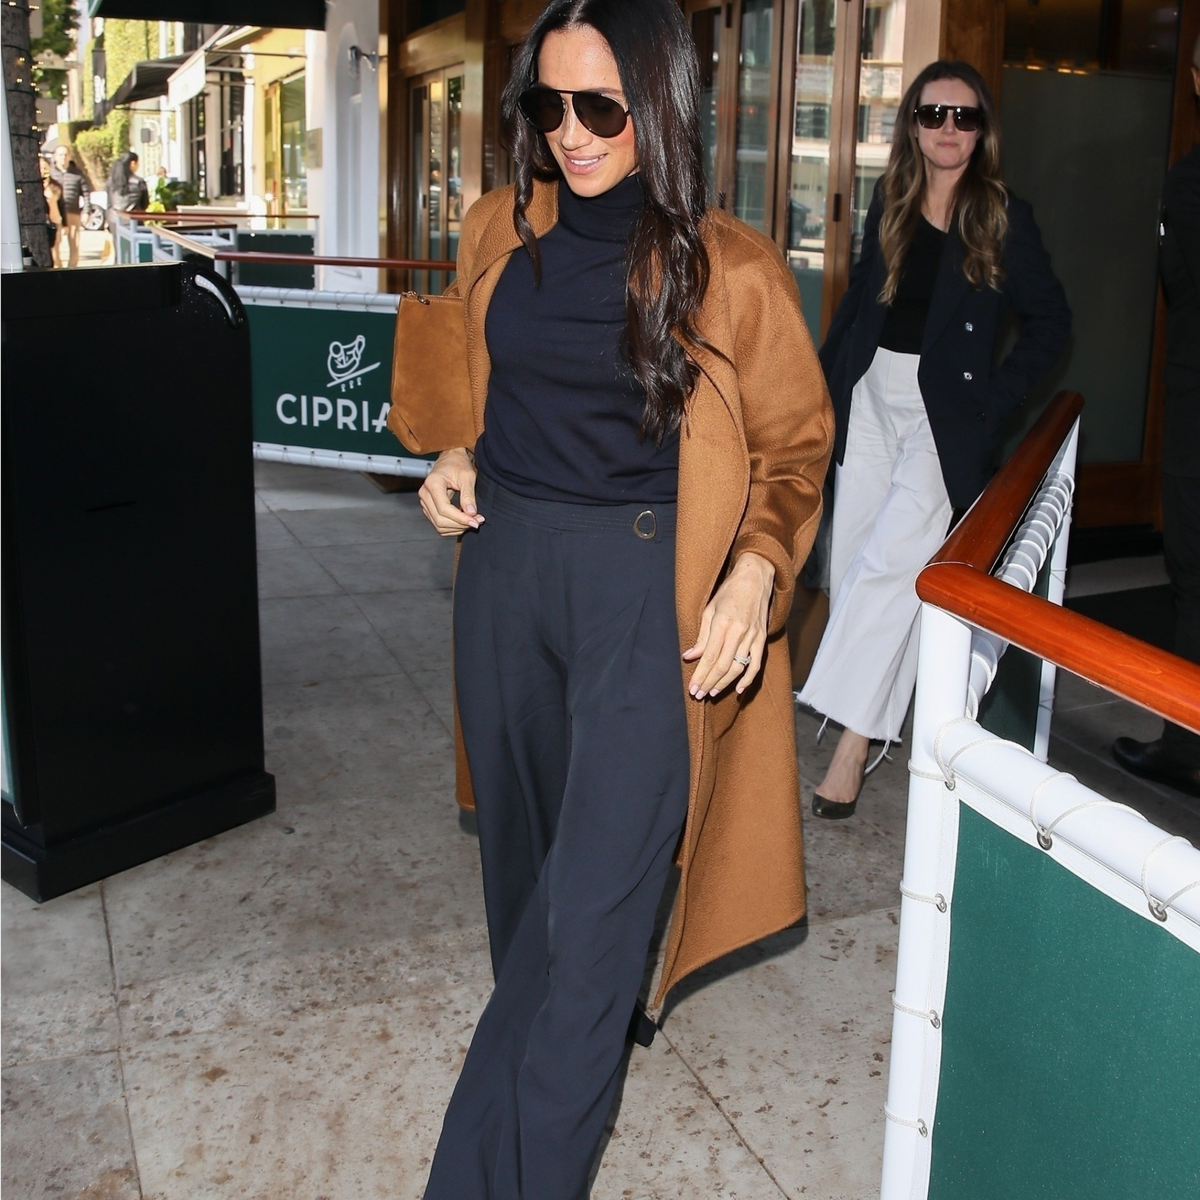 Meghan Markle Embraces the "Ladies Who Lunch" Life in an A-Lister-Worthy Outfit